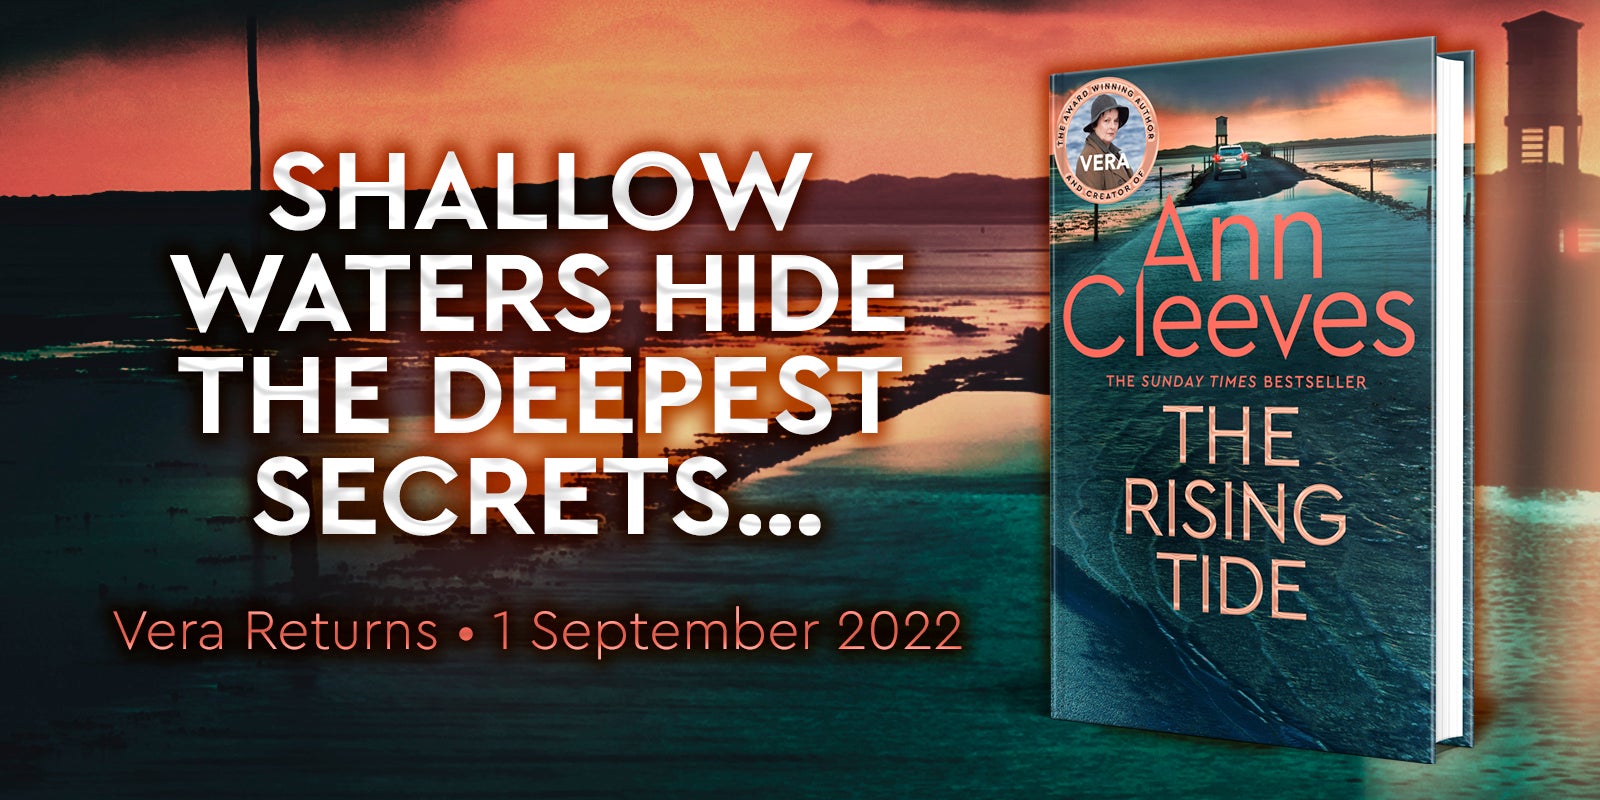 A banner that reads 'Shallow Waters Hide the Deepest Secrets...' alongside a copy of The Rising Tide by Ann Cleeves. Underneath, the words 'Vera Returns. 1 September 2022' 